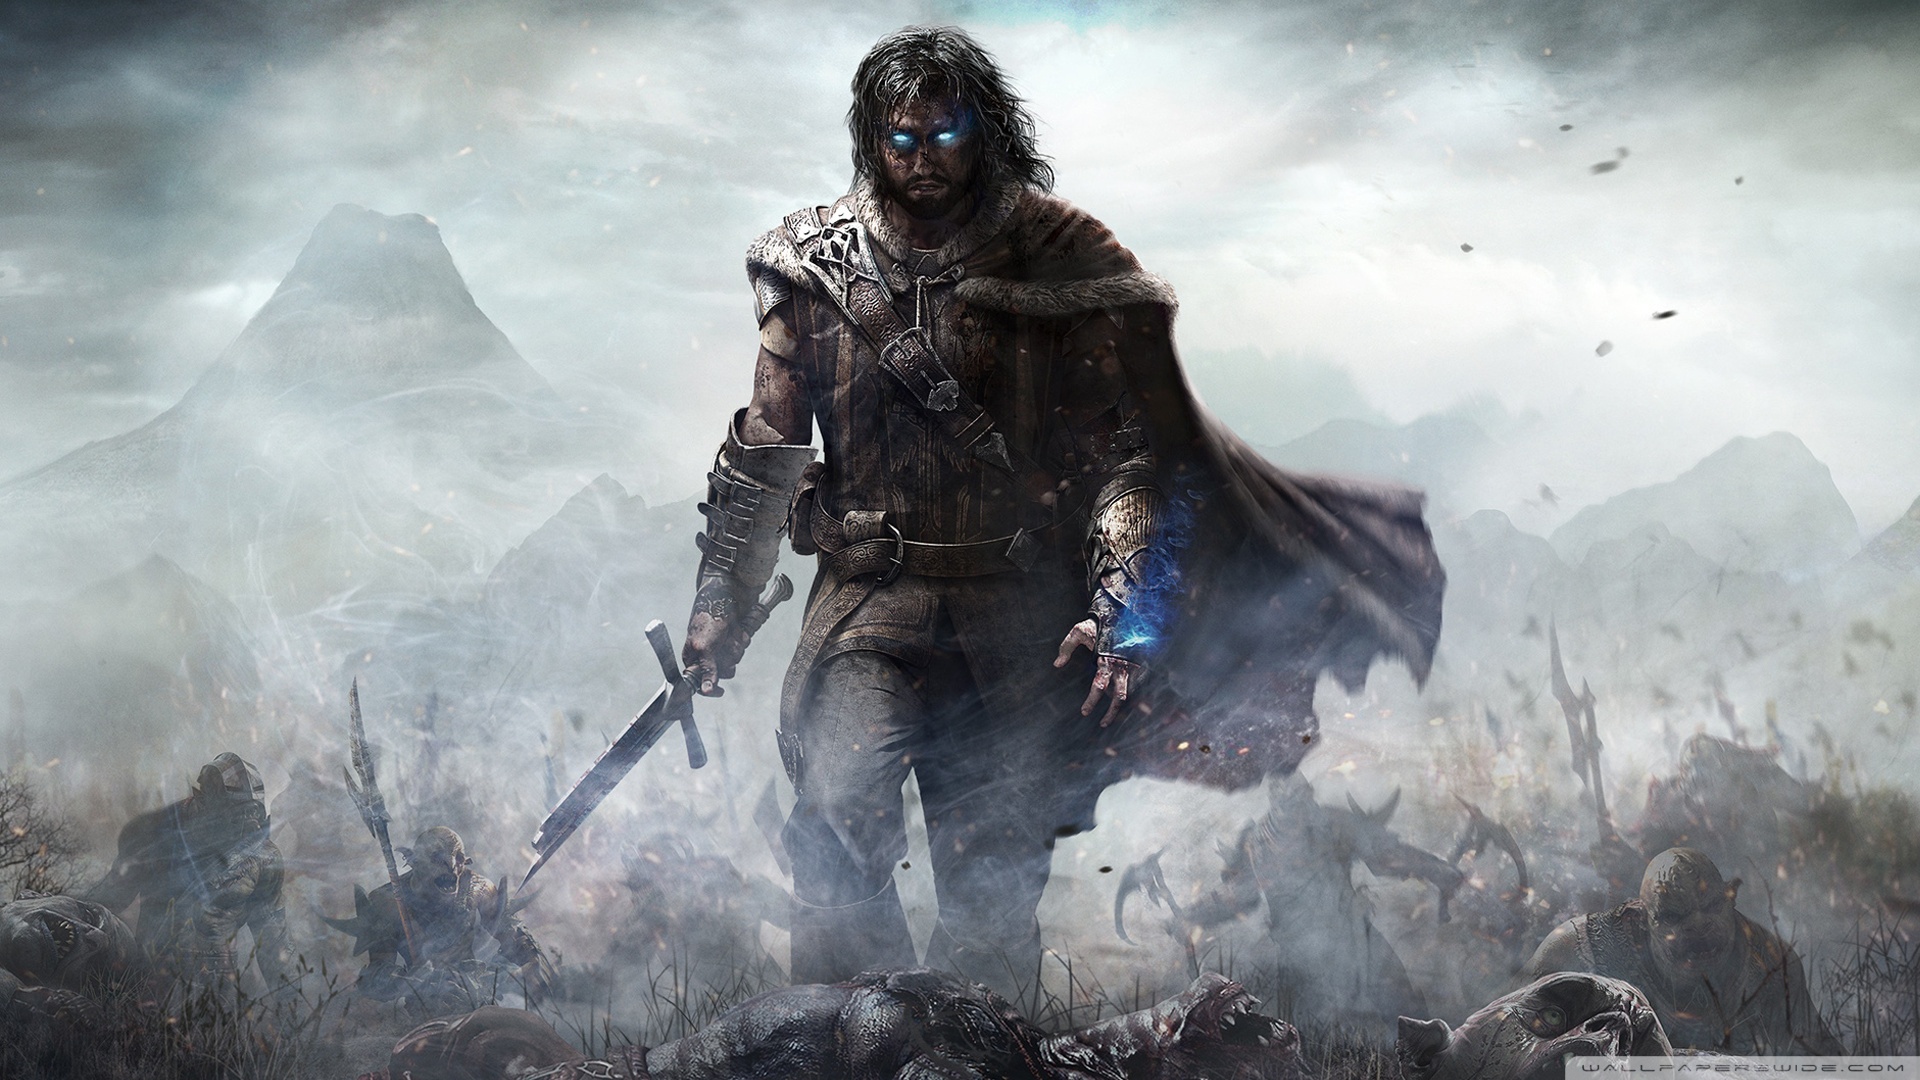 Middle-earth: Shadow of Mordor PC system requirements